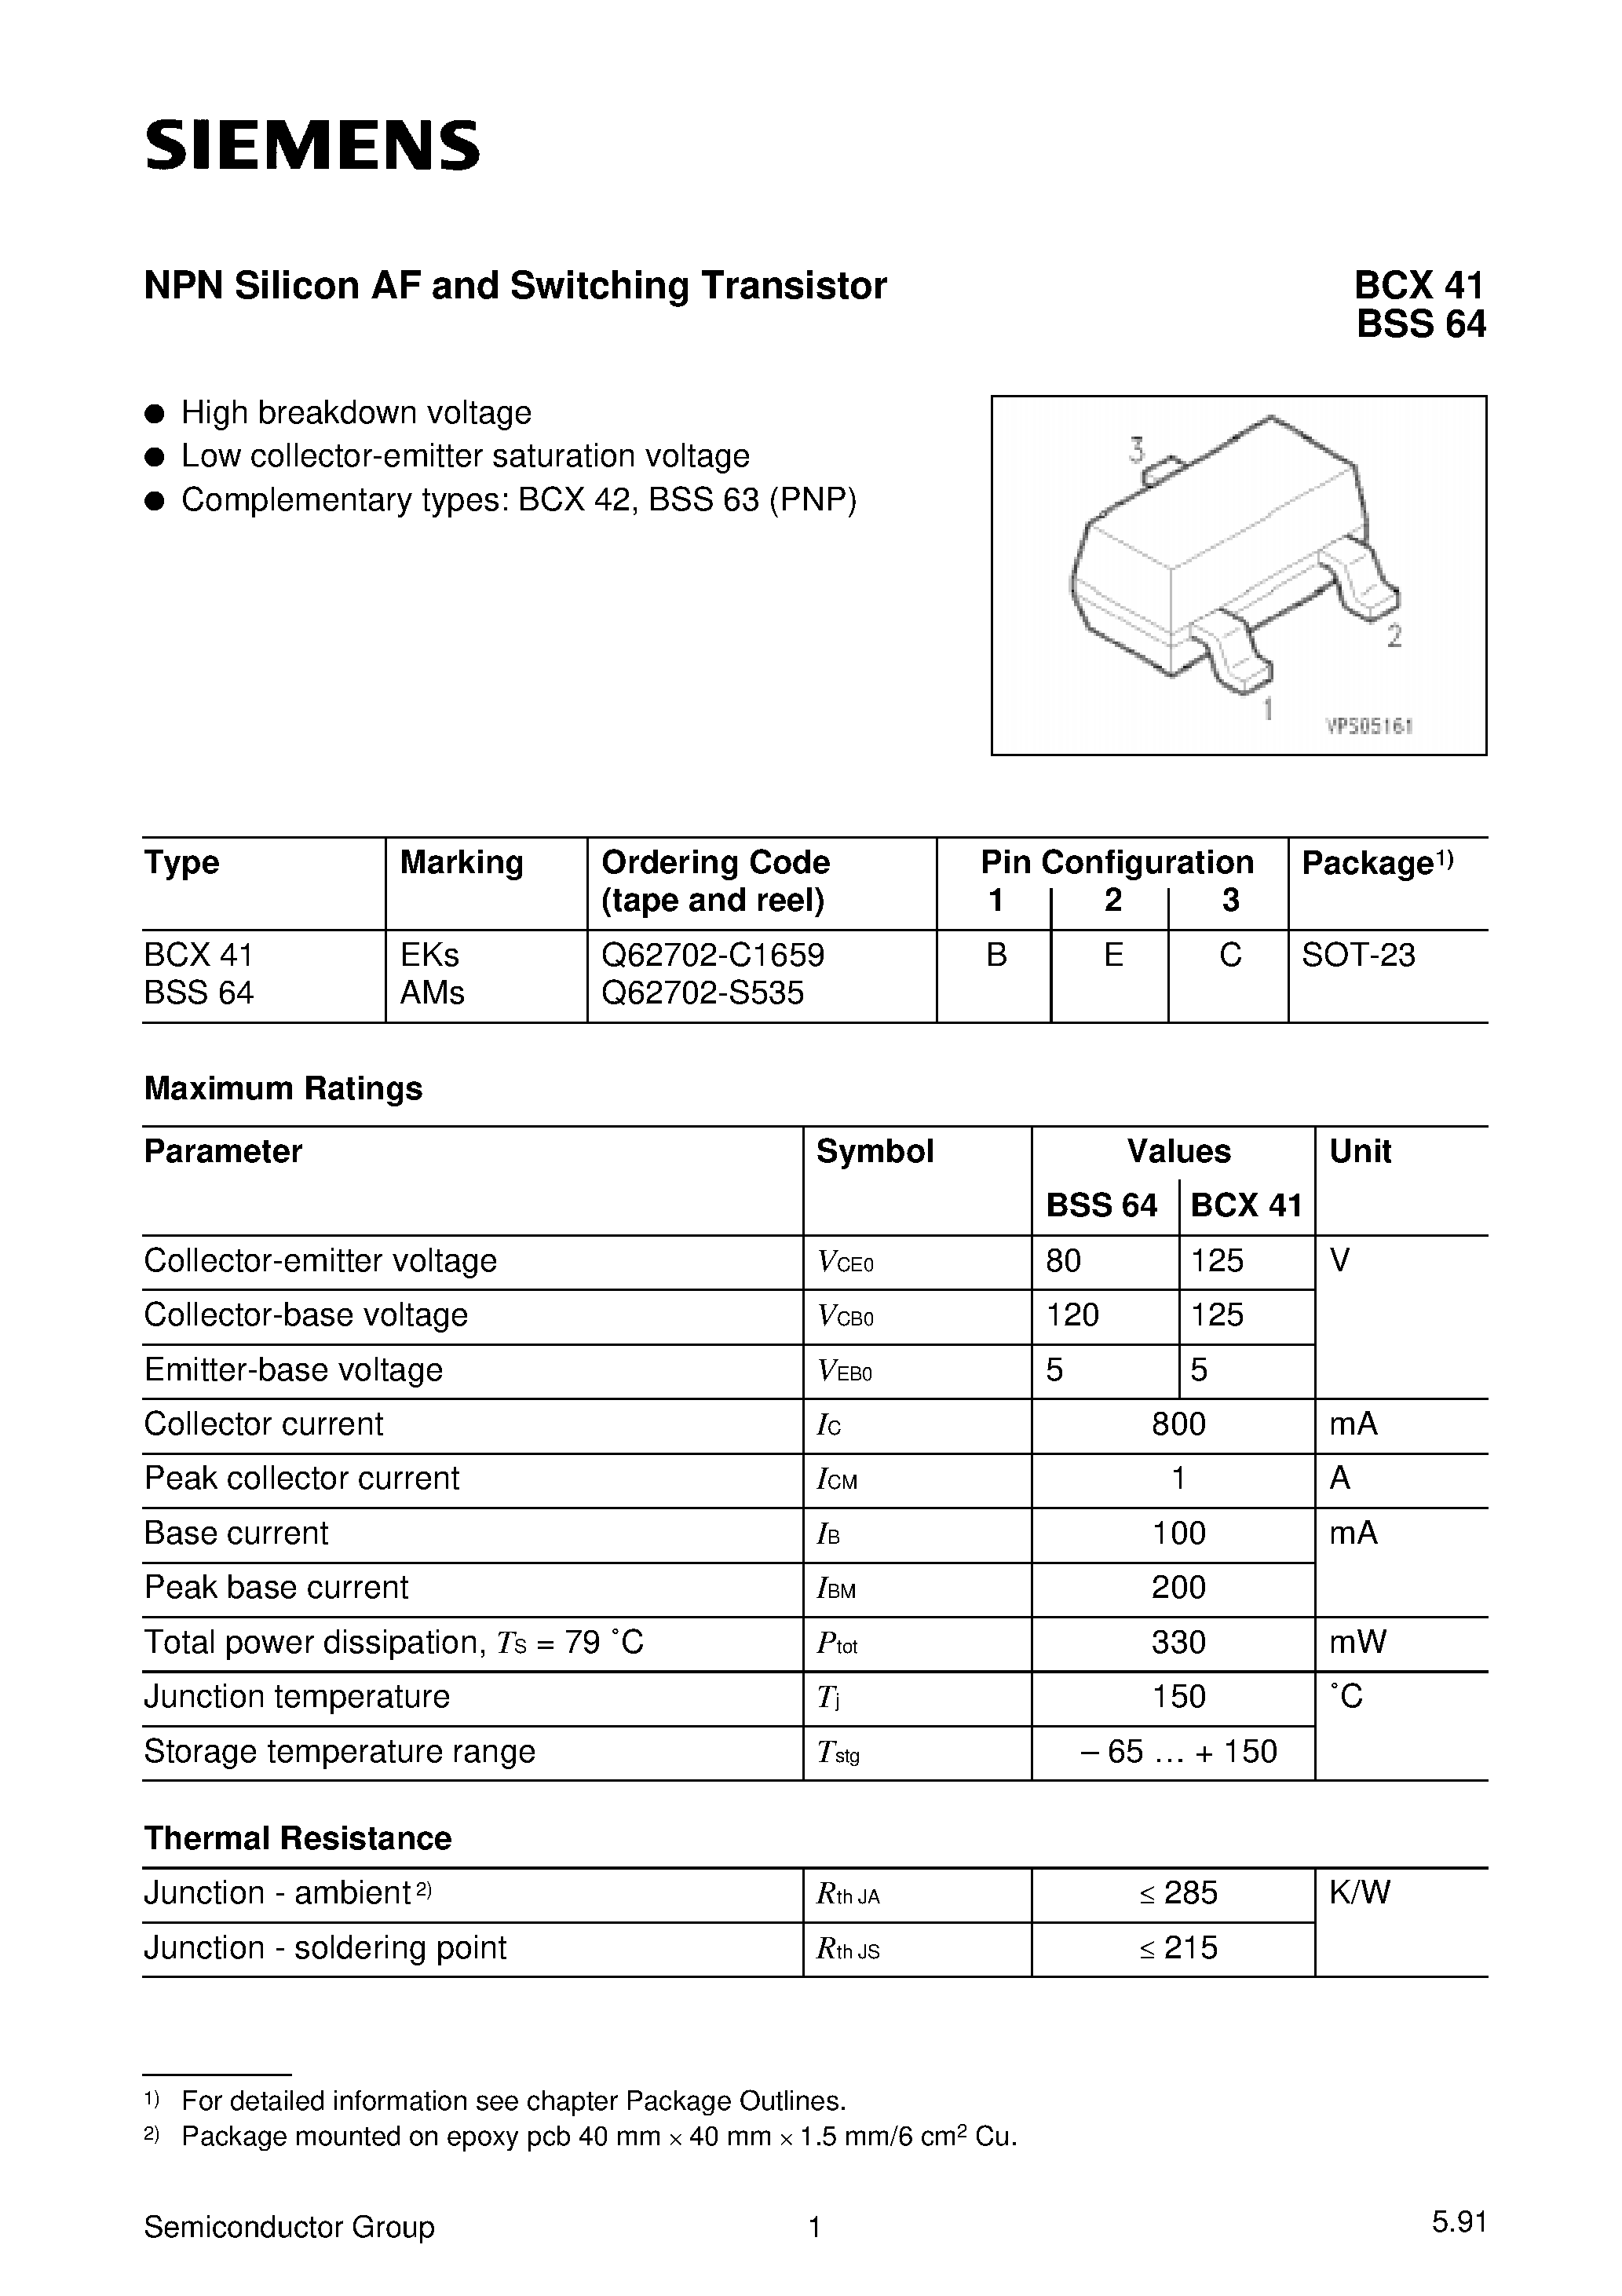 Datasheet BCX41 - NPN Silicon AF and Switching Transistor (High breakdown voltage Low collector-emitter saturation voltage) page 1